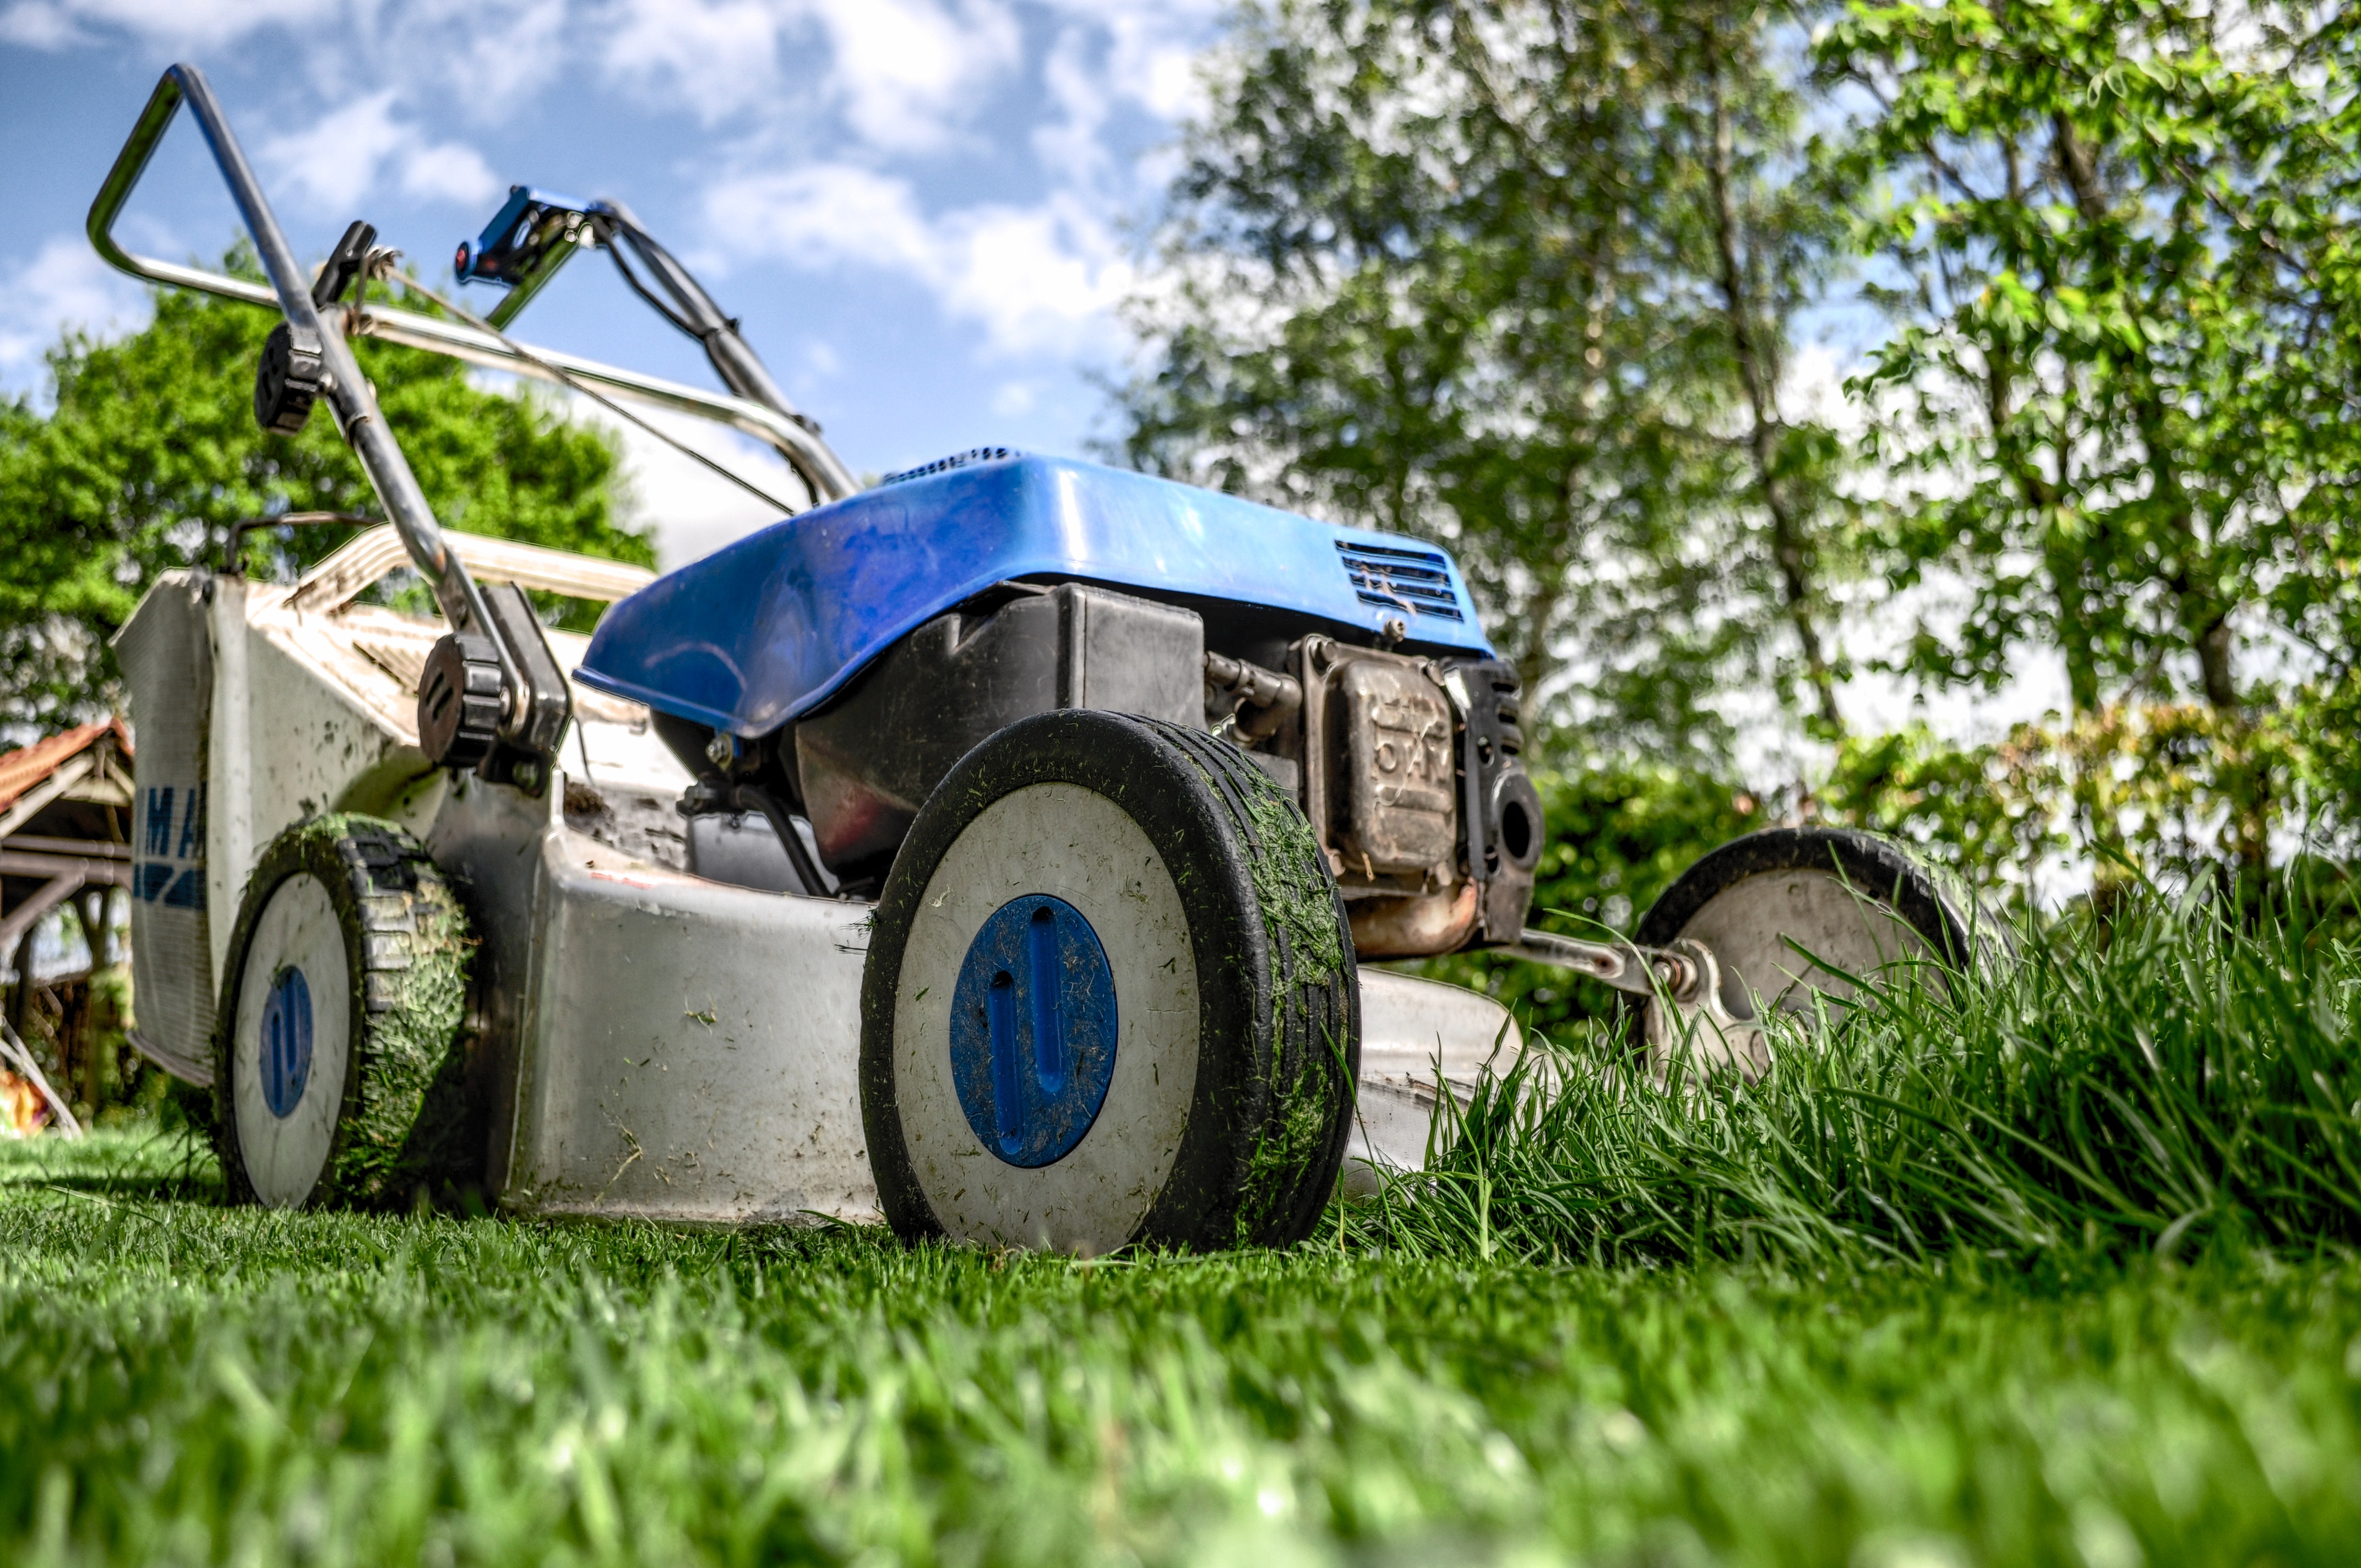 A picture of a garden lawn mower.